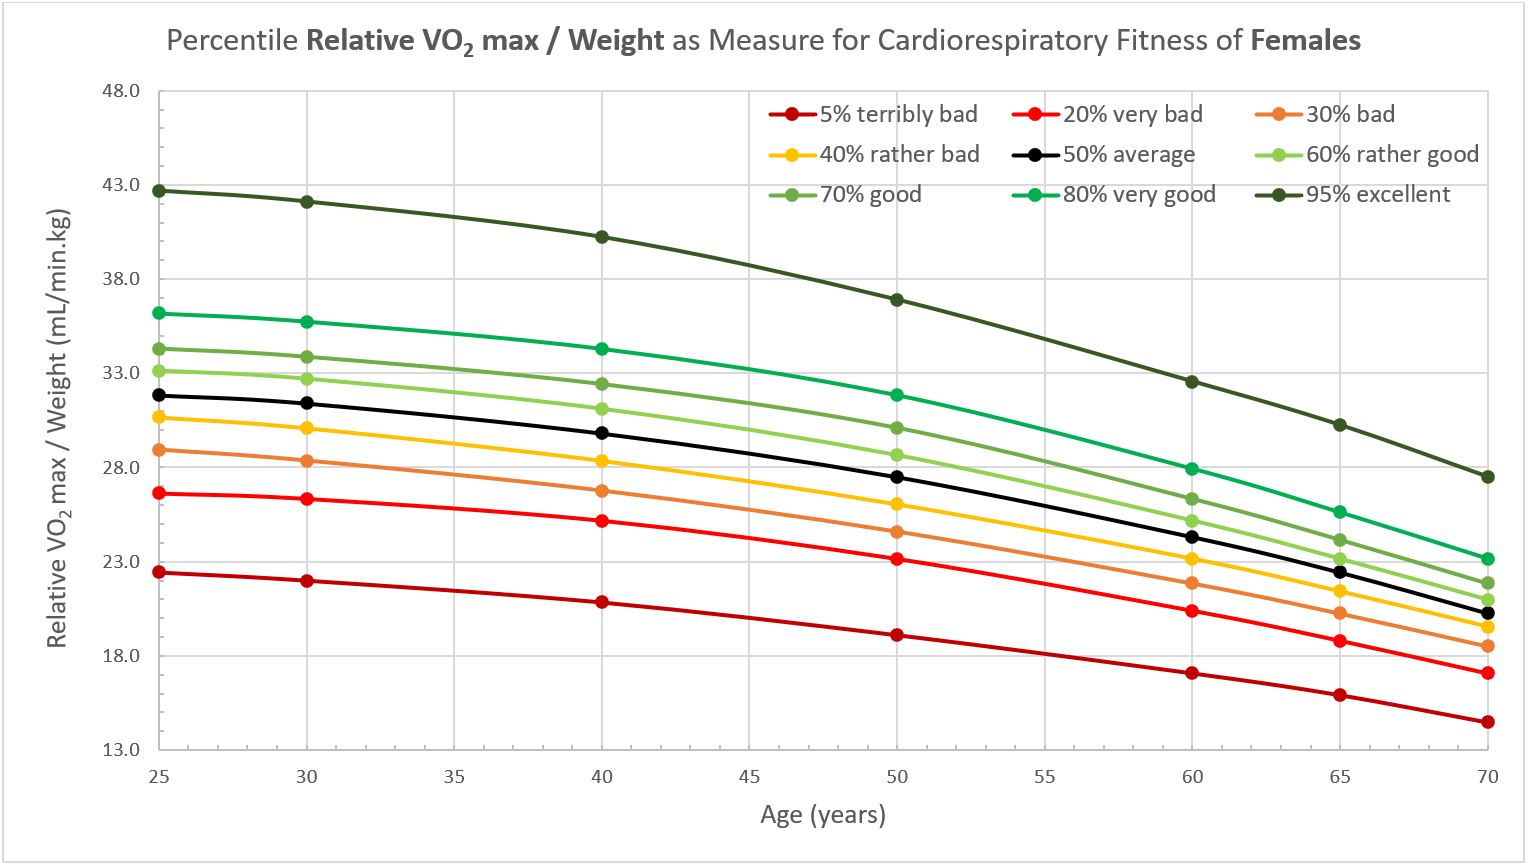 Relative VO2 max over weight reference chart for females